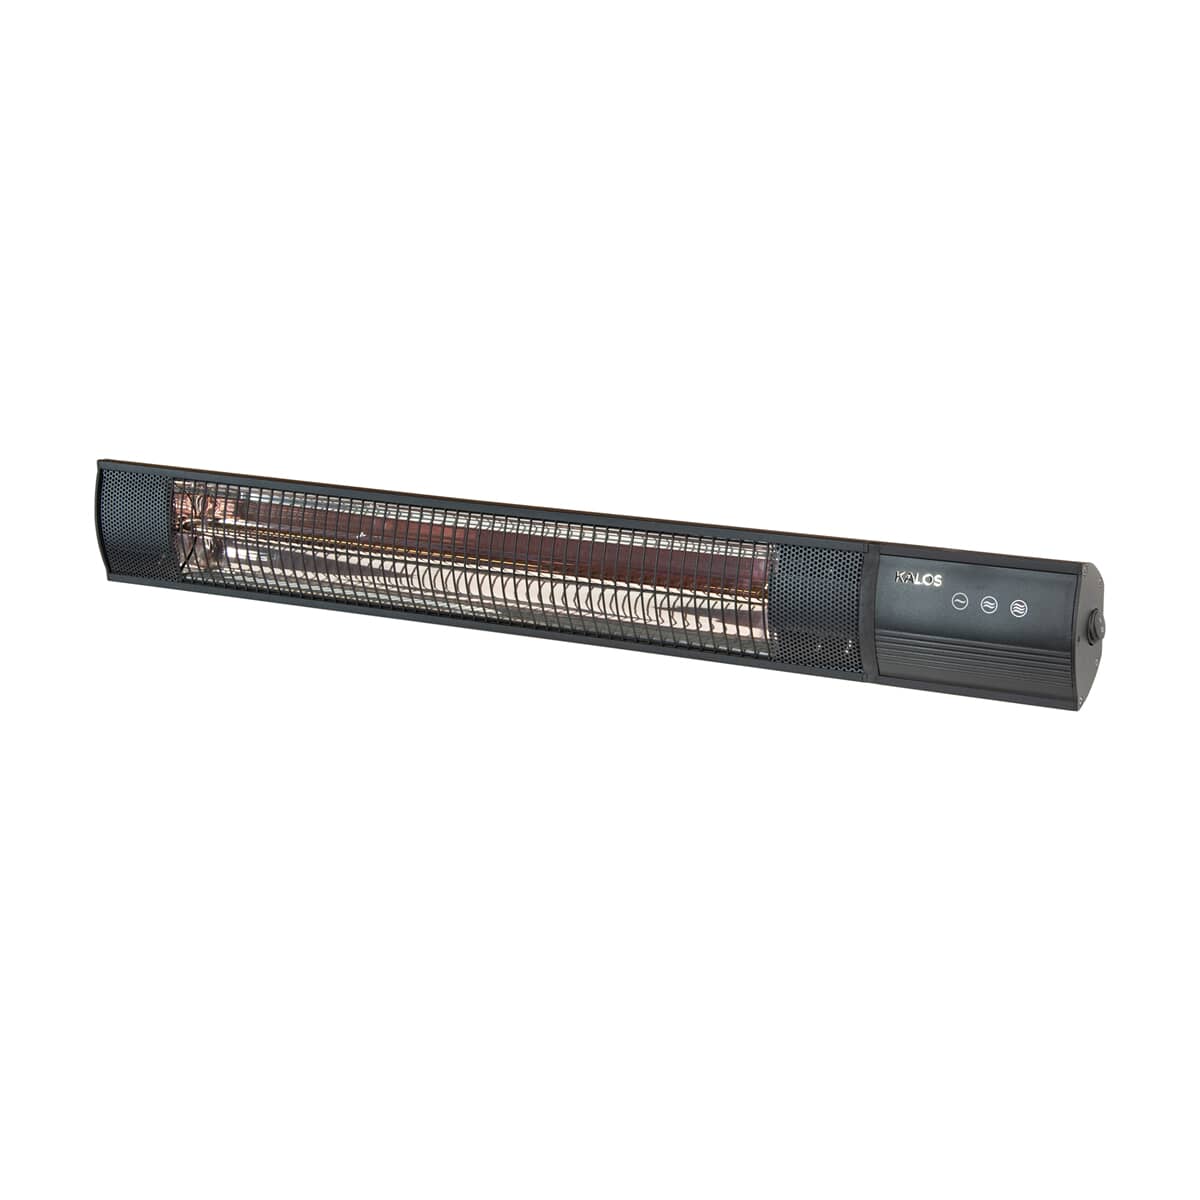 Kettler Kalos Electric Wall Mounted Patio Heater with WiFi Remote